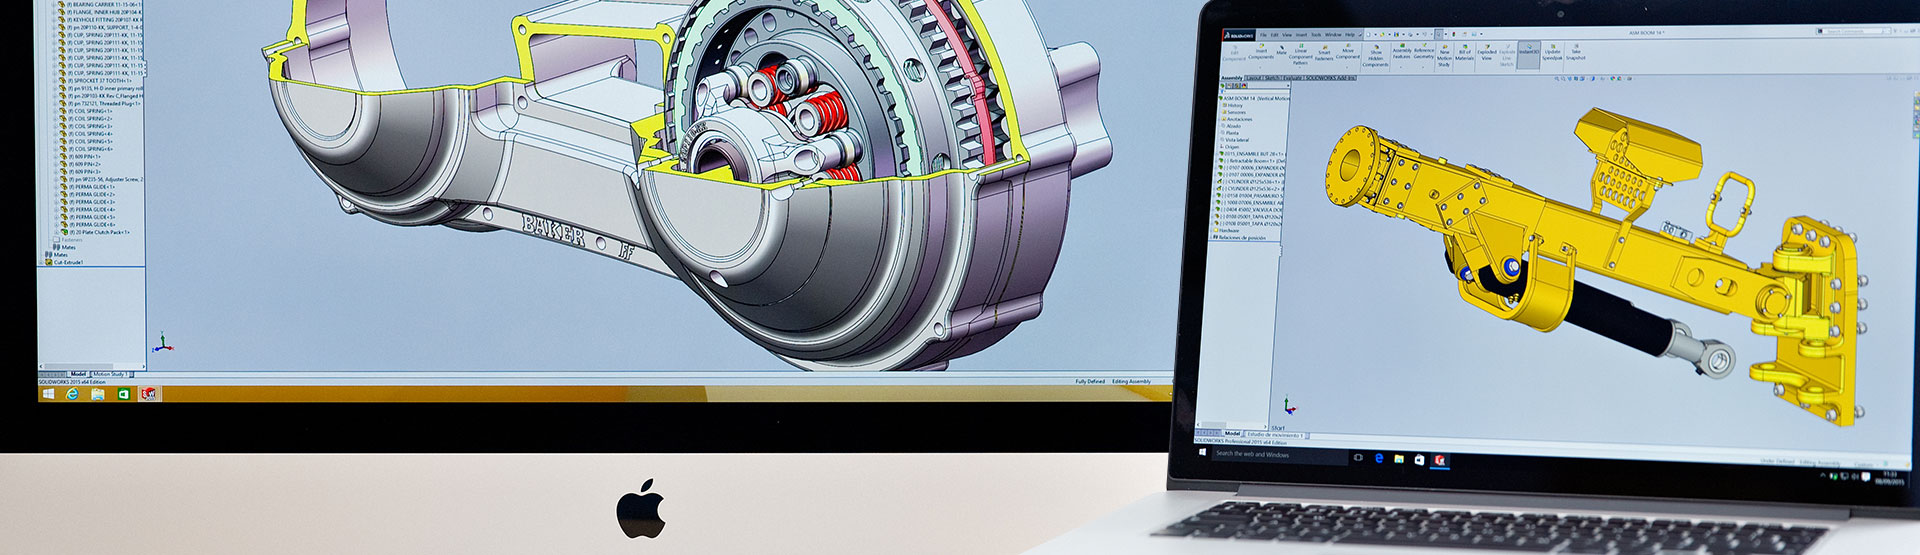 solidworks for mac